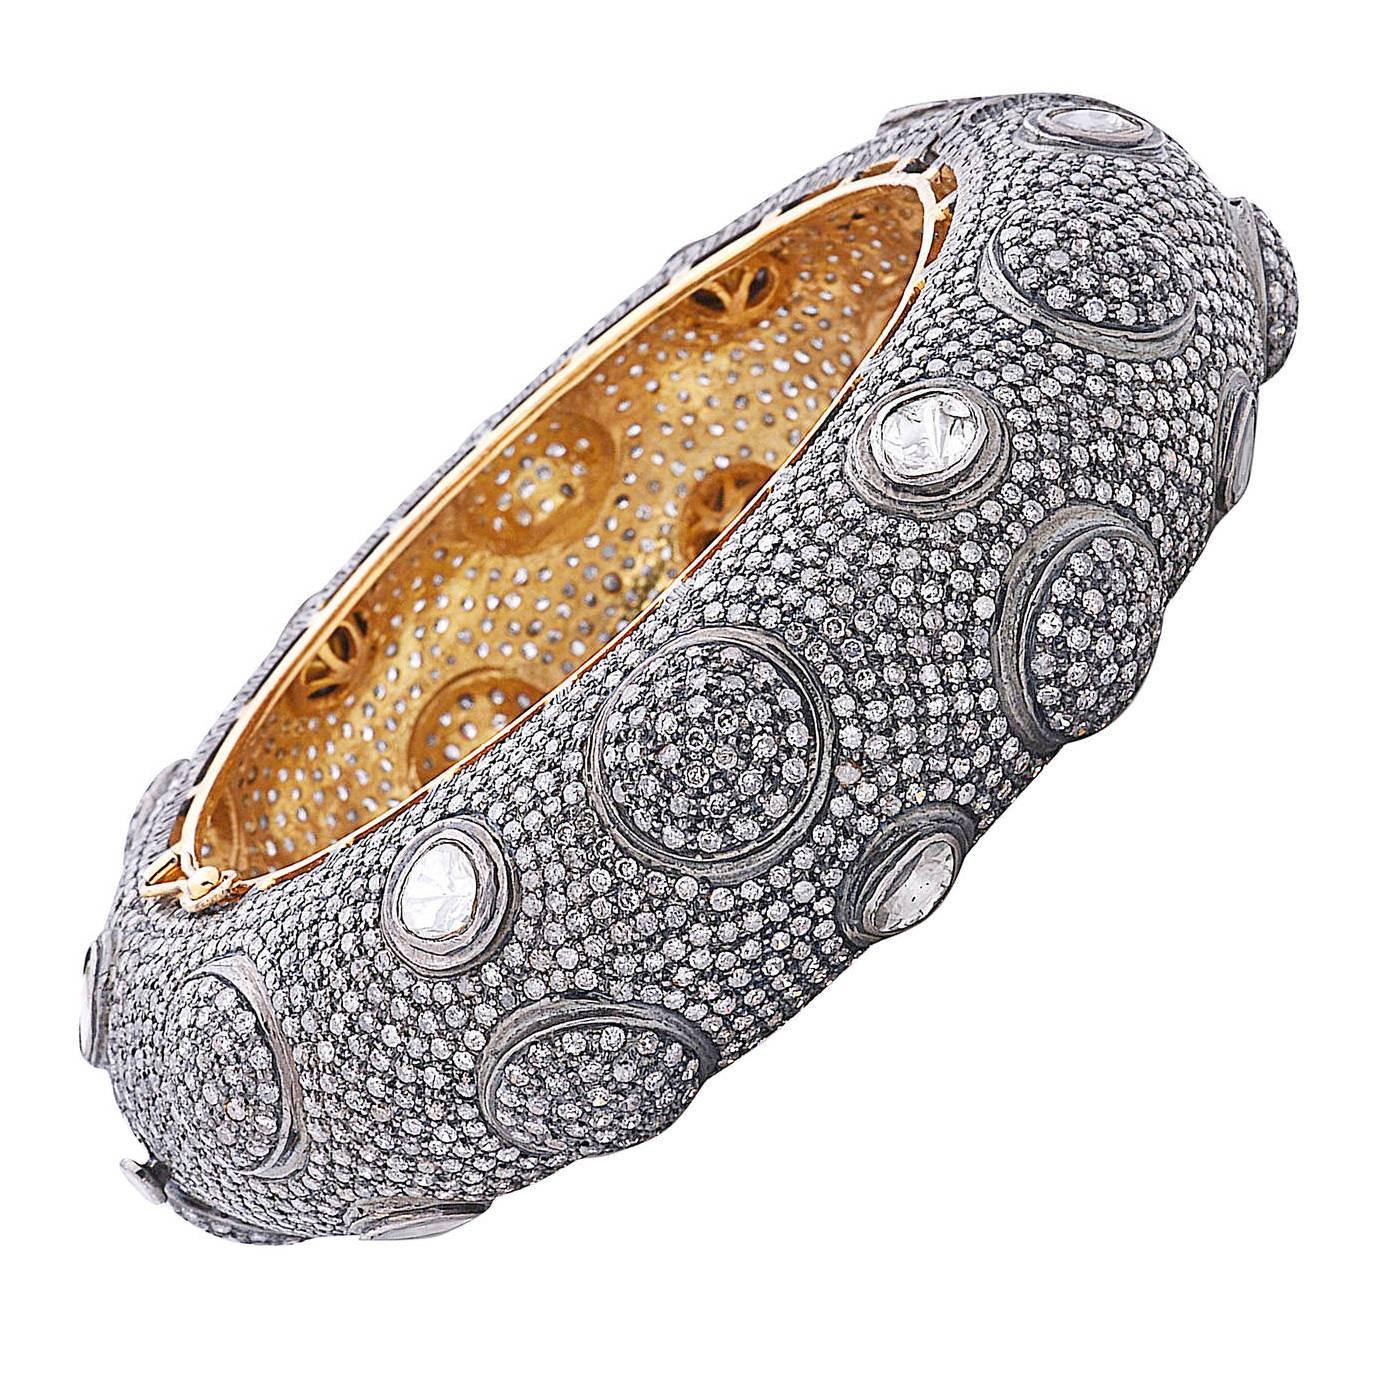 Pave Diamond Bracelet With Rosecut Diamonds Made In 14k Gold & Silver For Sale